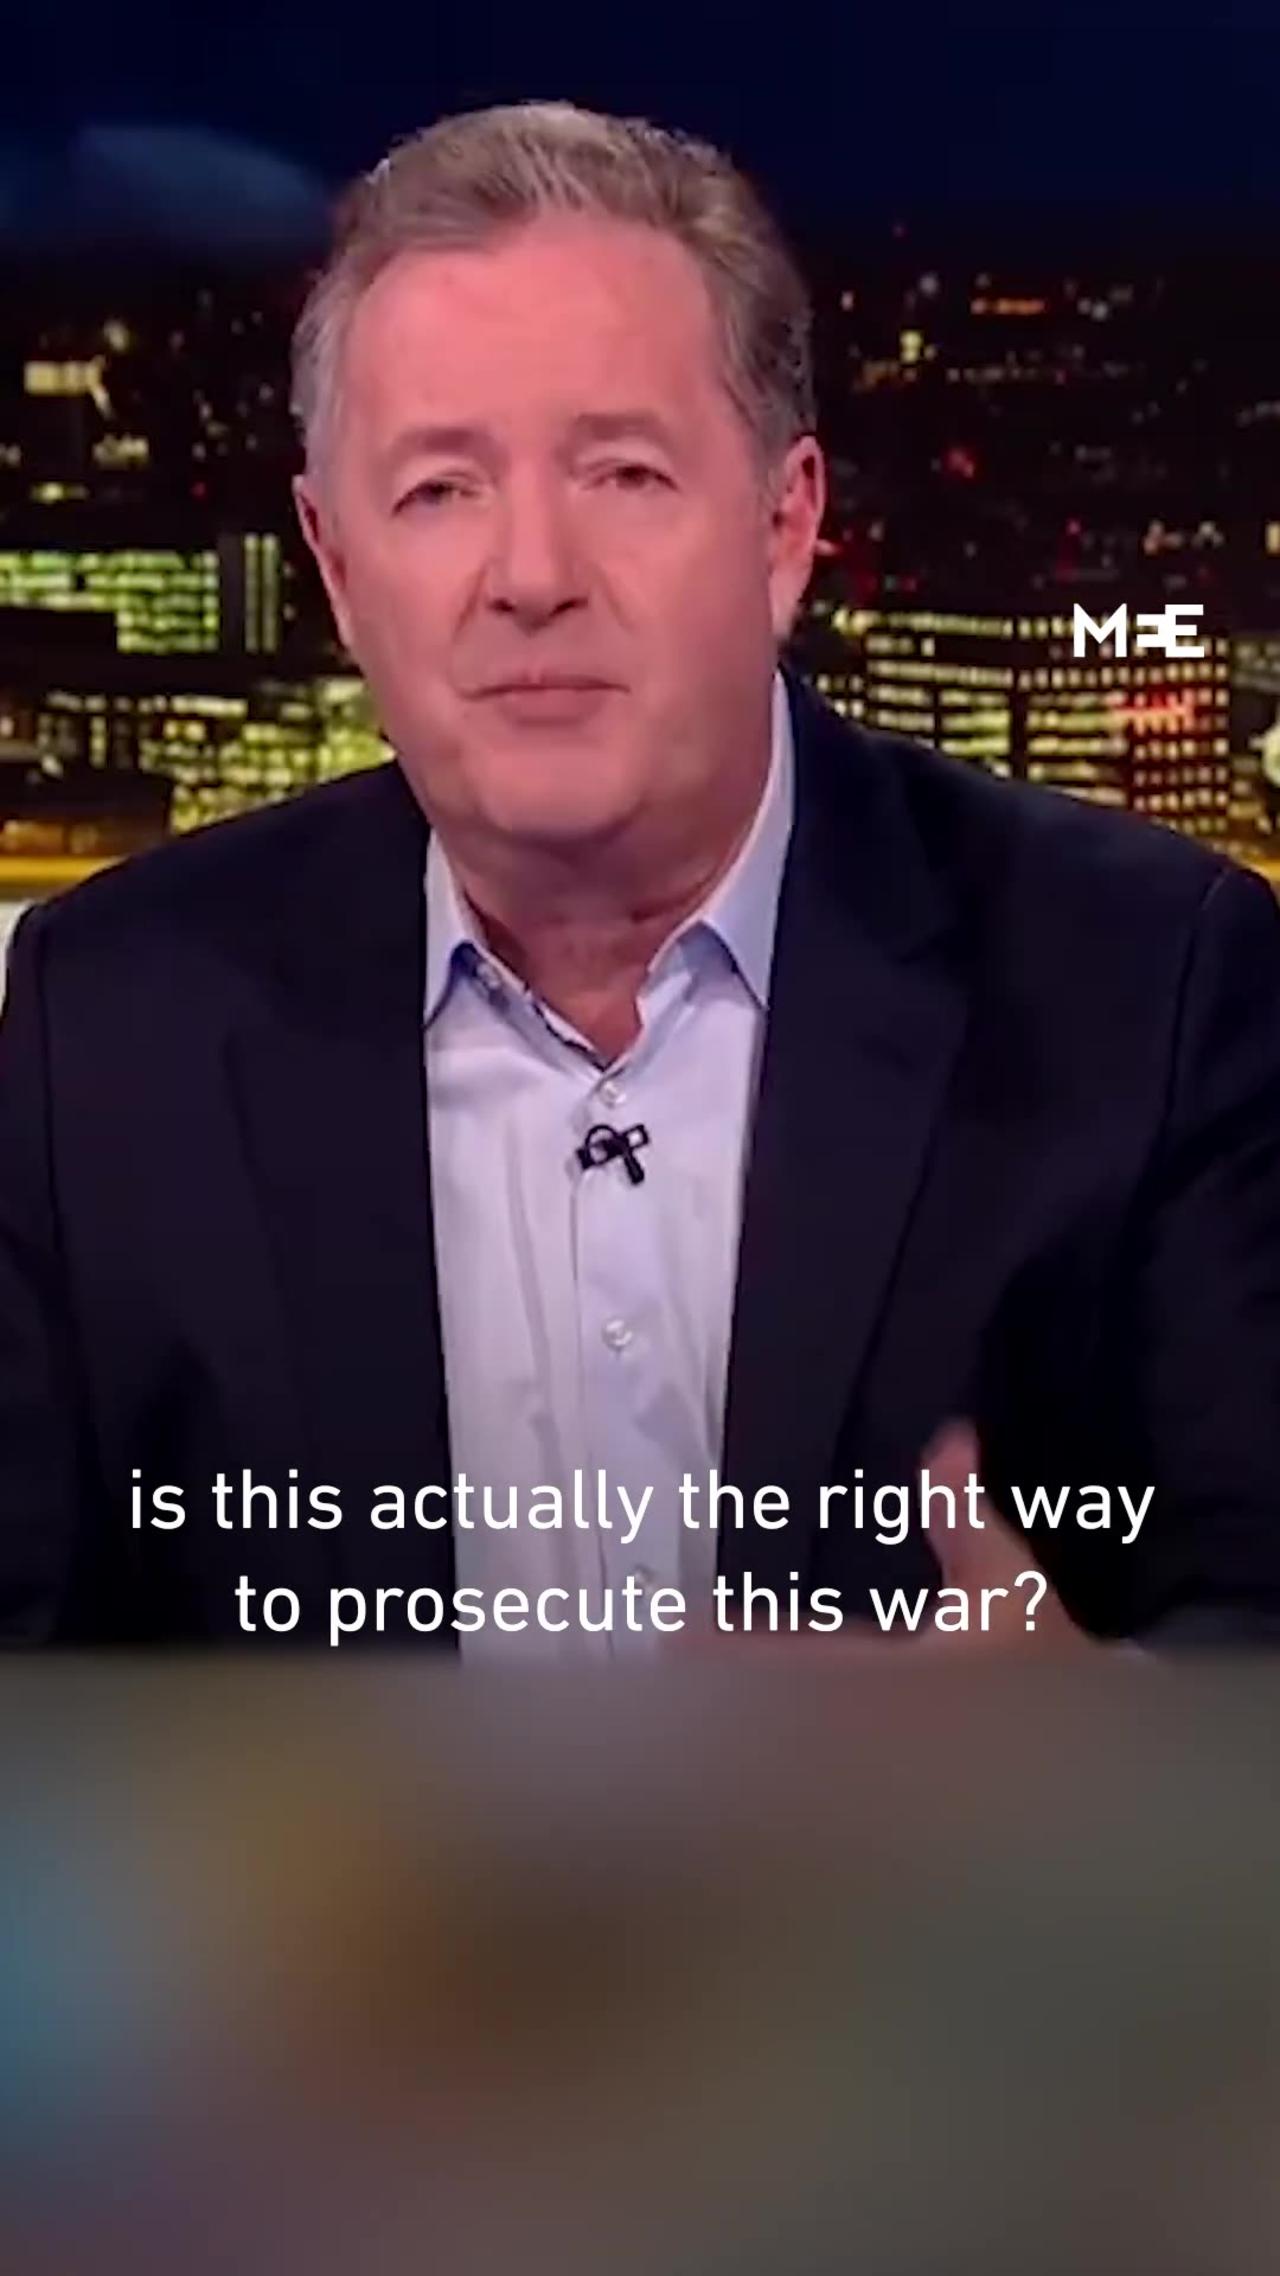 "You're killing thousands and thousands of children,” says Piers Morgan to former Israeli PM